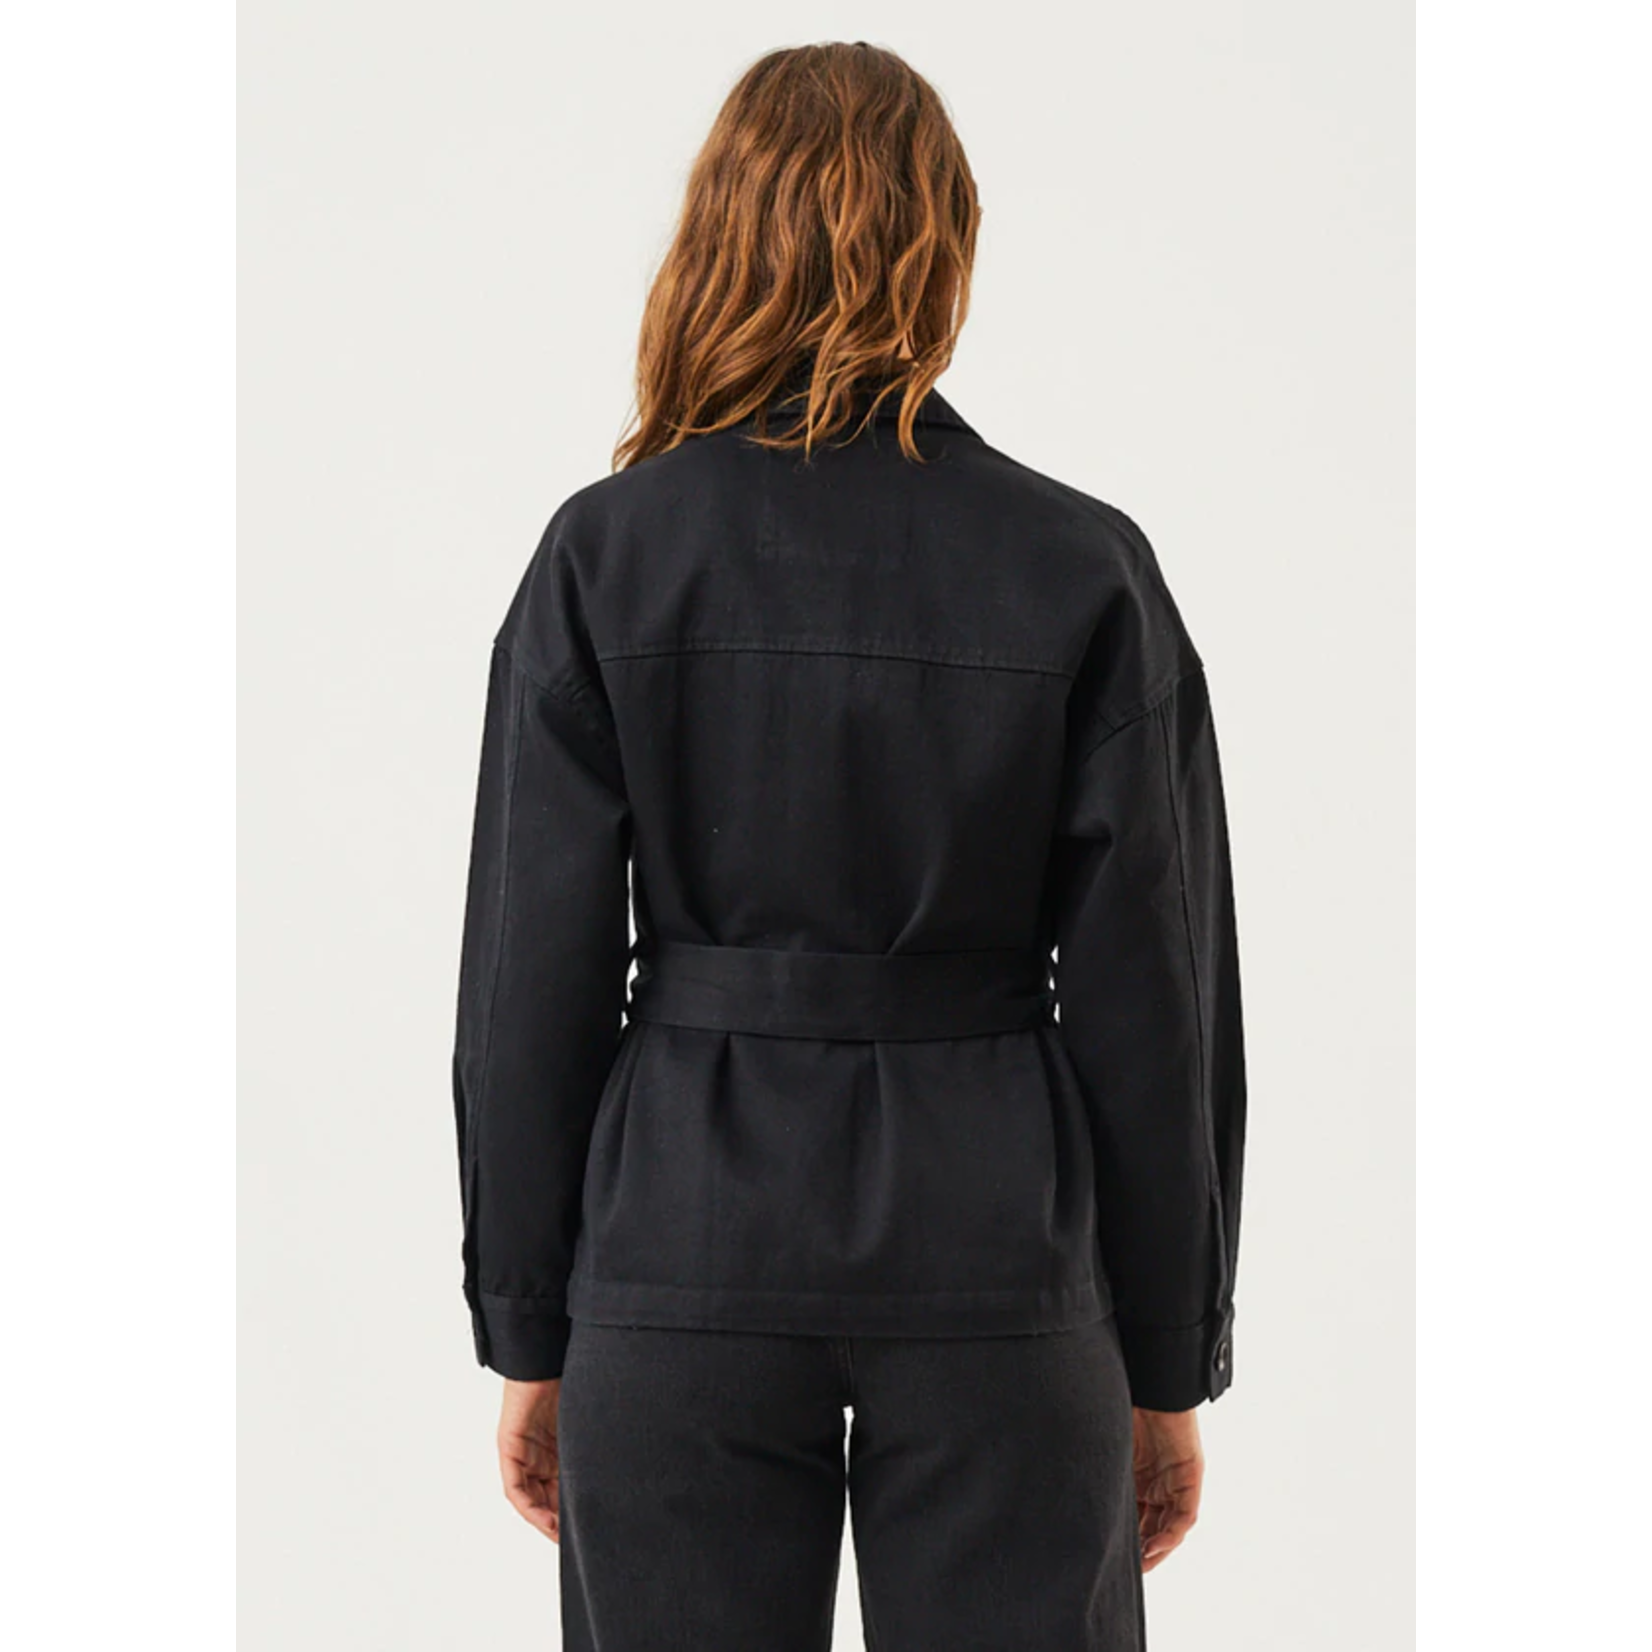 Afends Small Moments Hemp Jacket